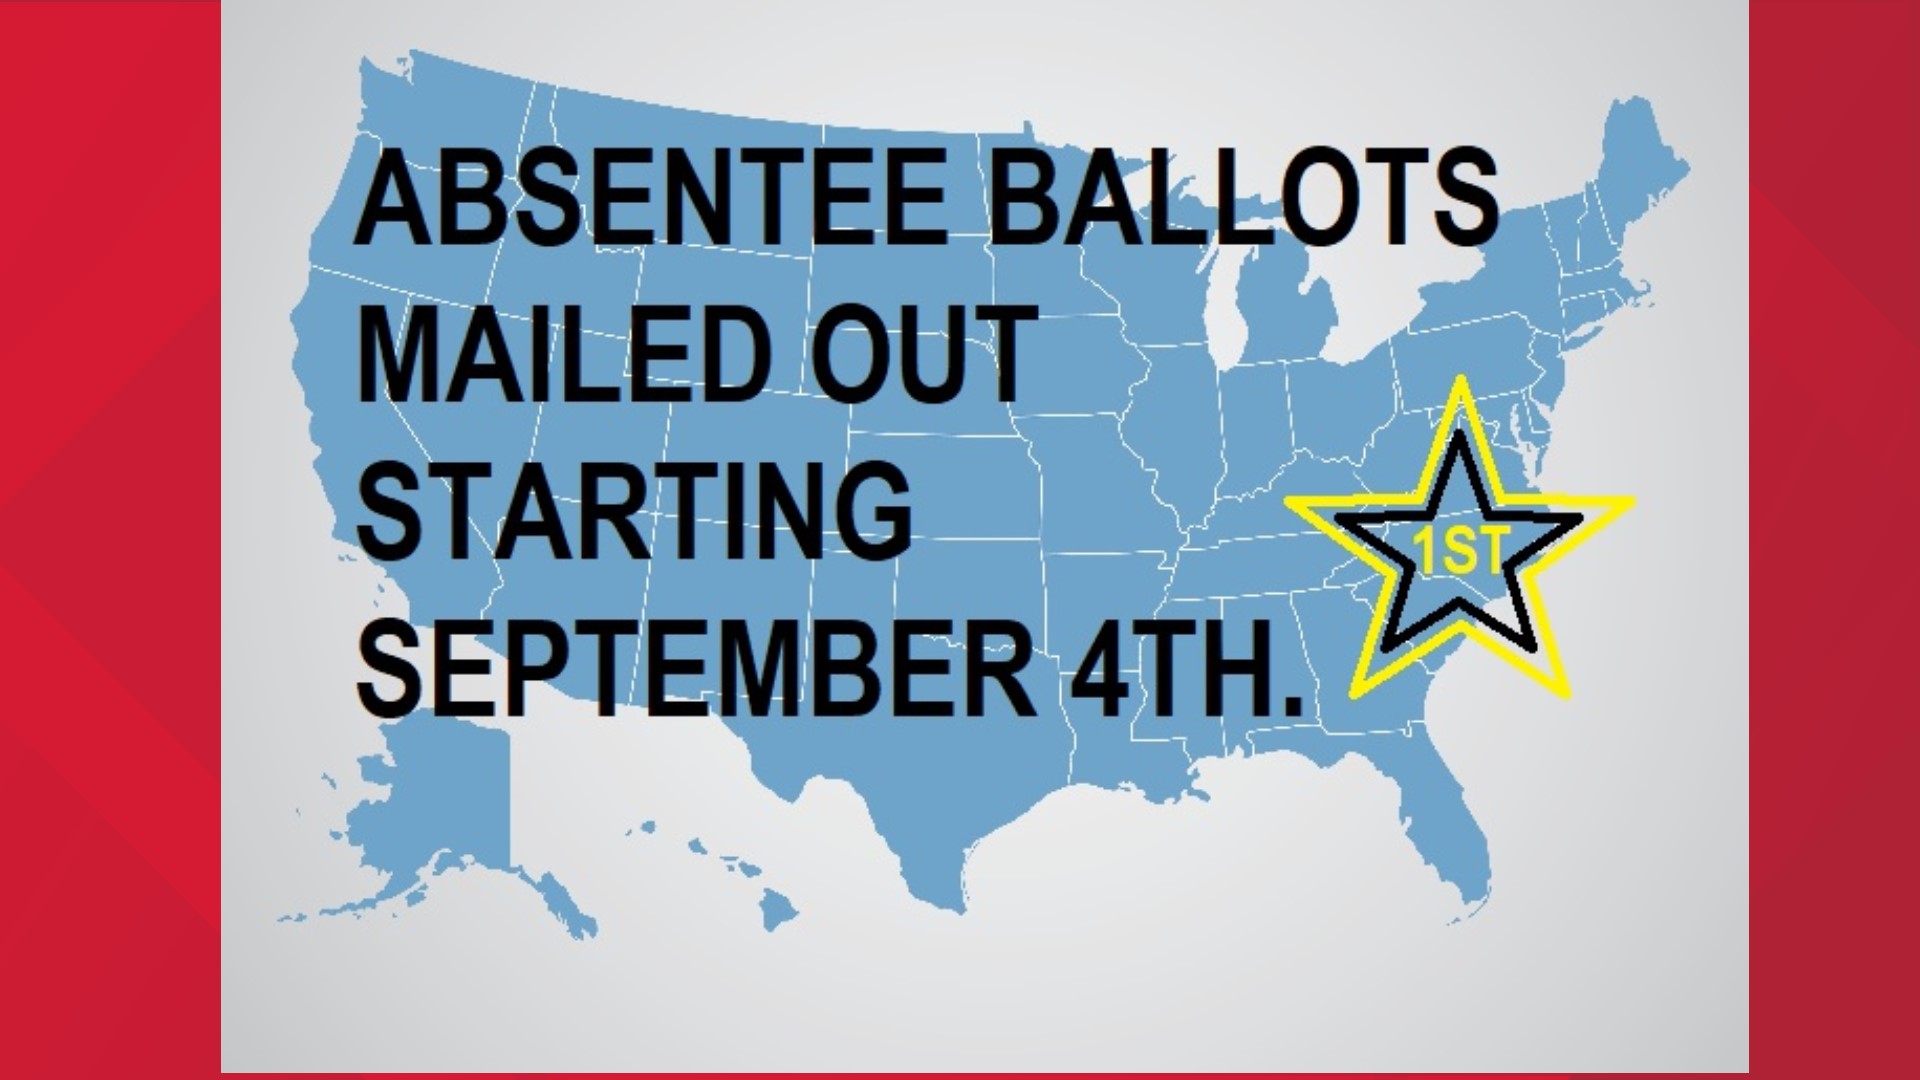 NC is the first state to mail out absentee ballots. The mailings begin Sept. 4. Here’s how to get your absentee ballot.